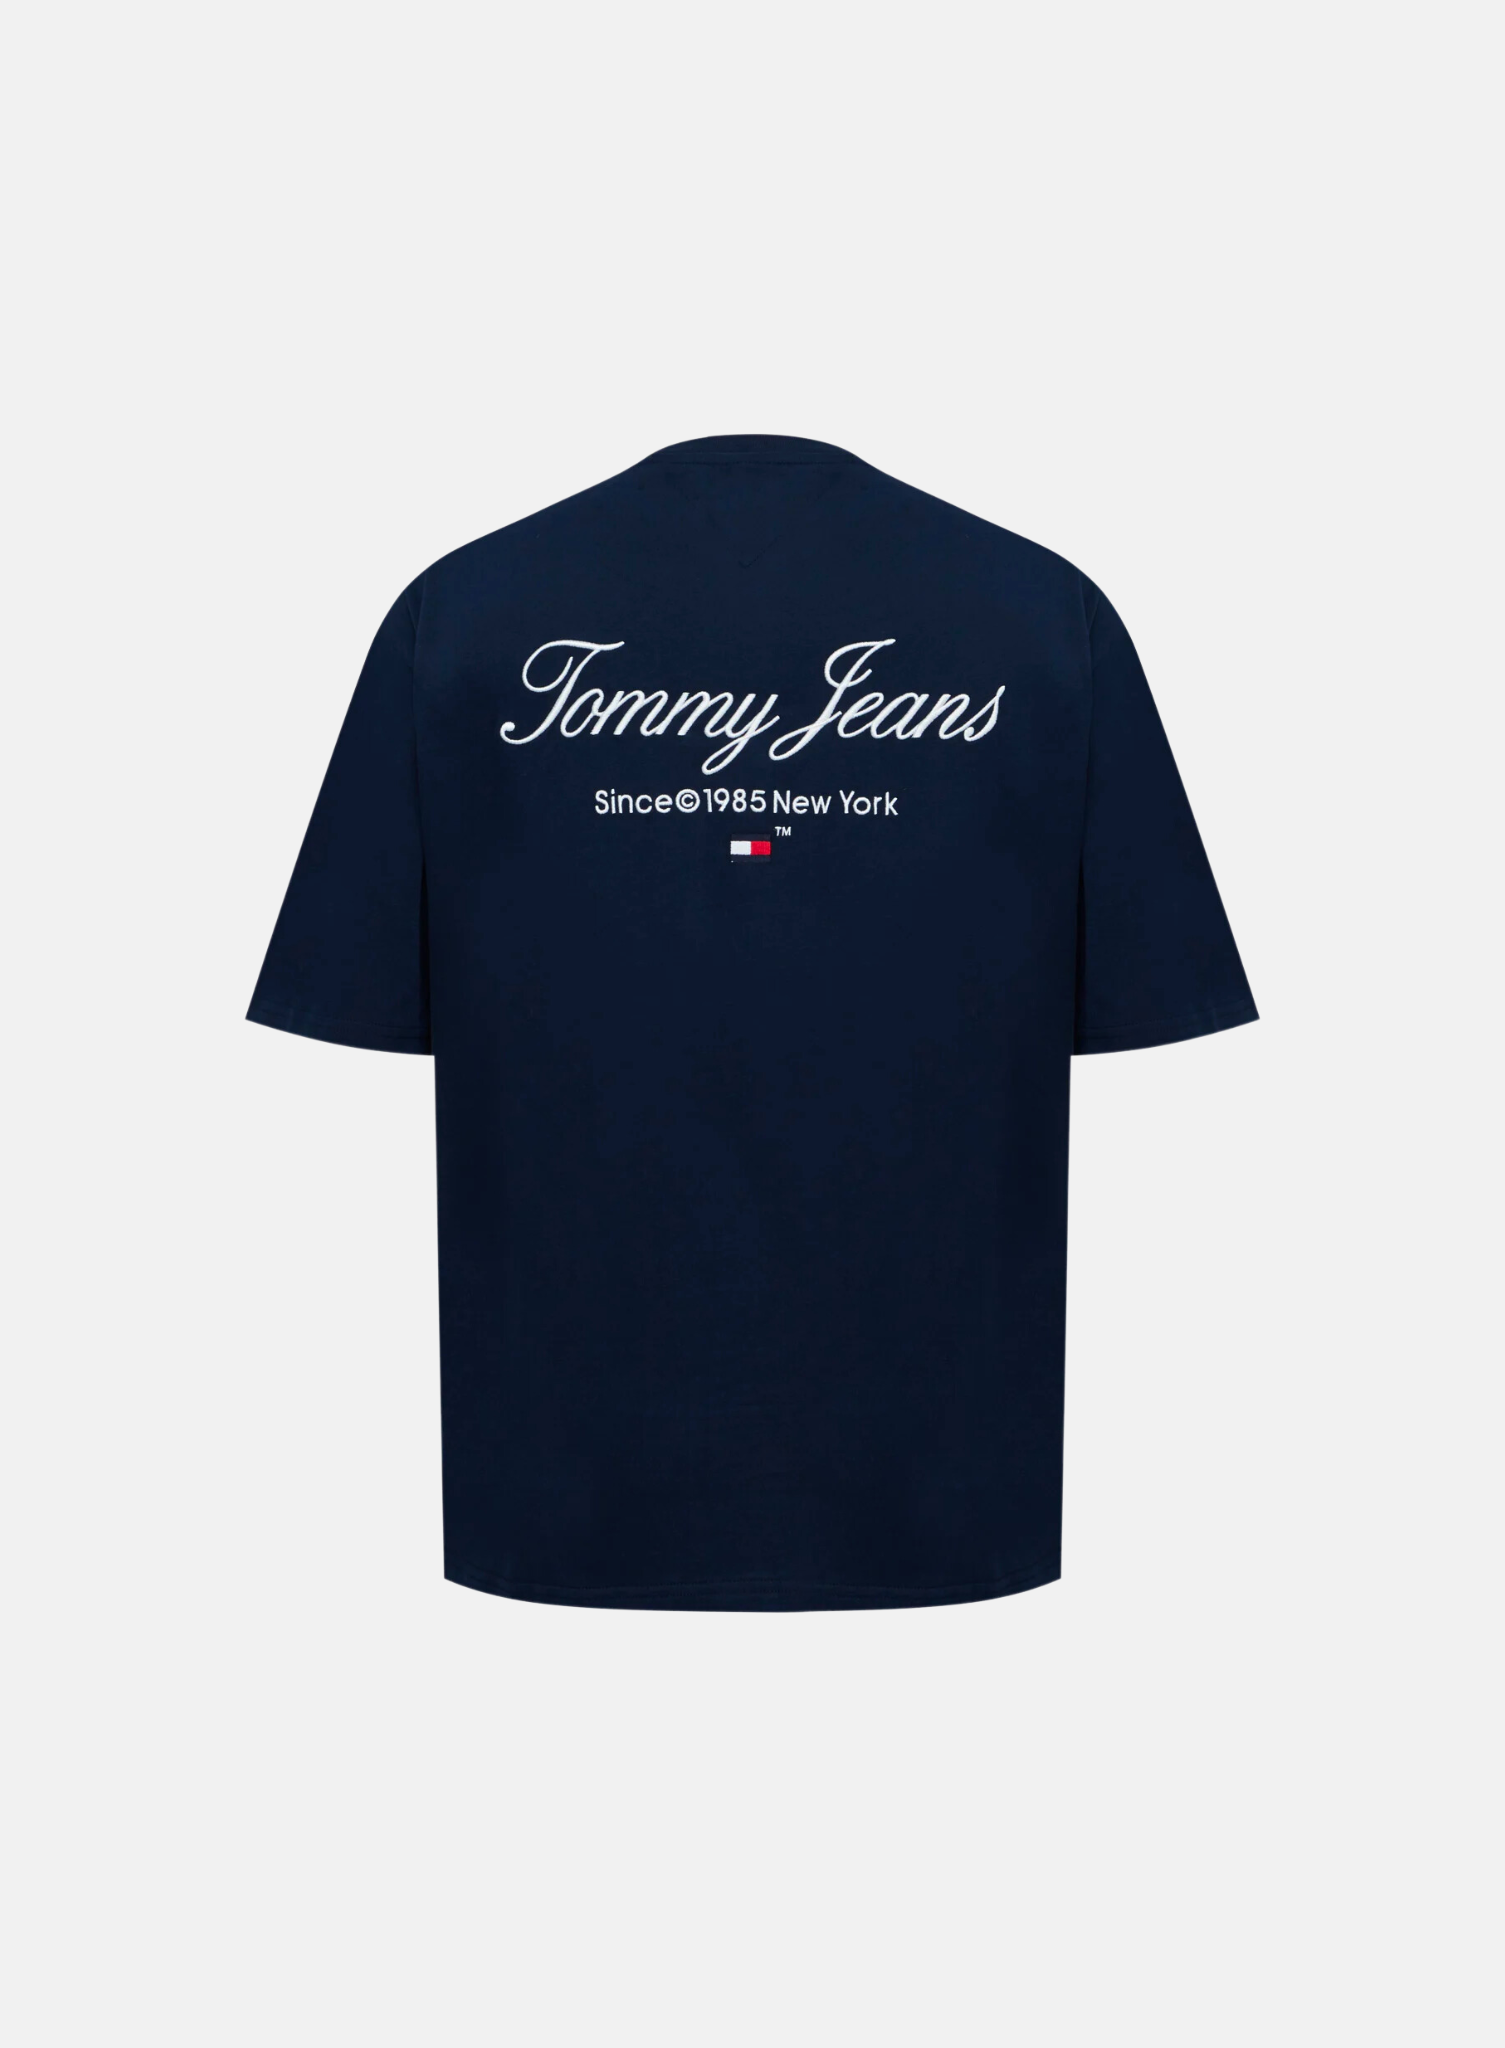 Tommy Jeans Classic Oversized Serif Tee Navy - Hympala Store 